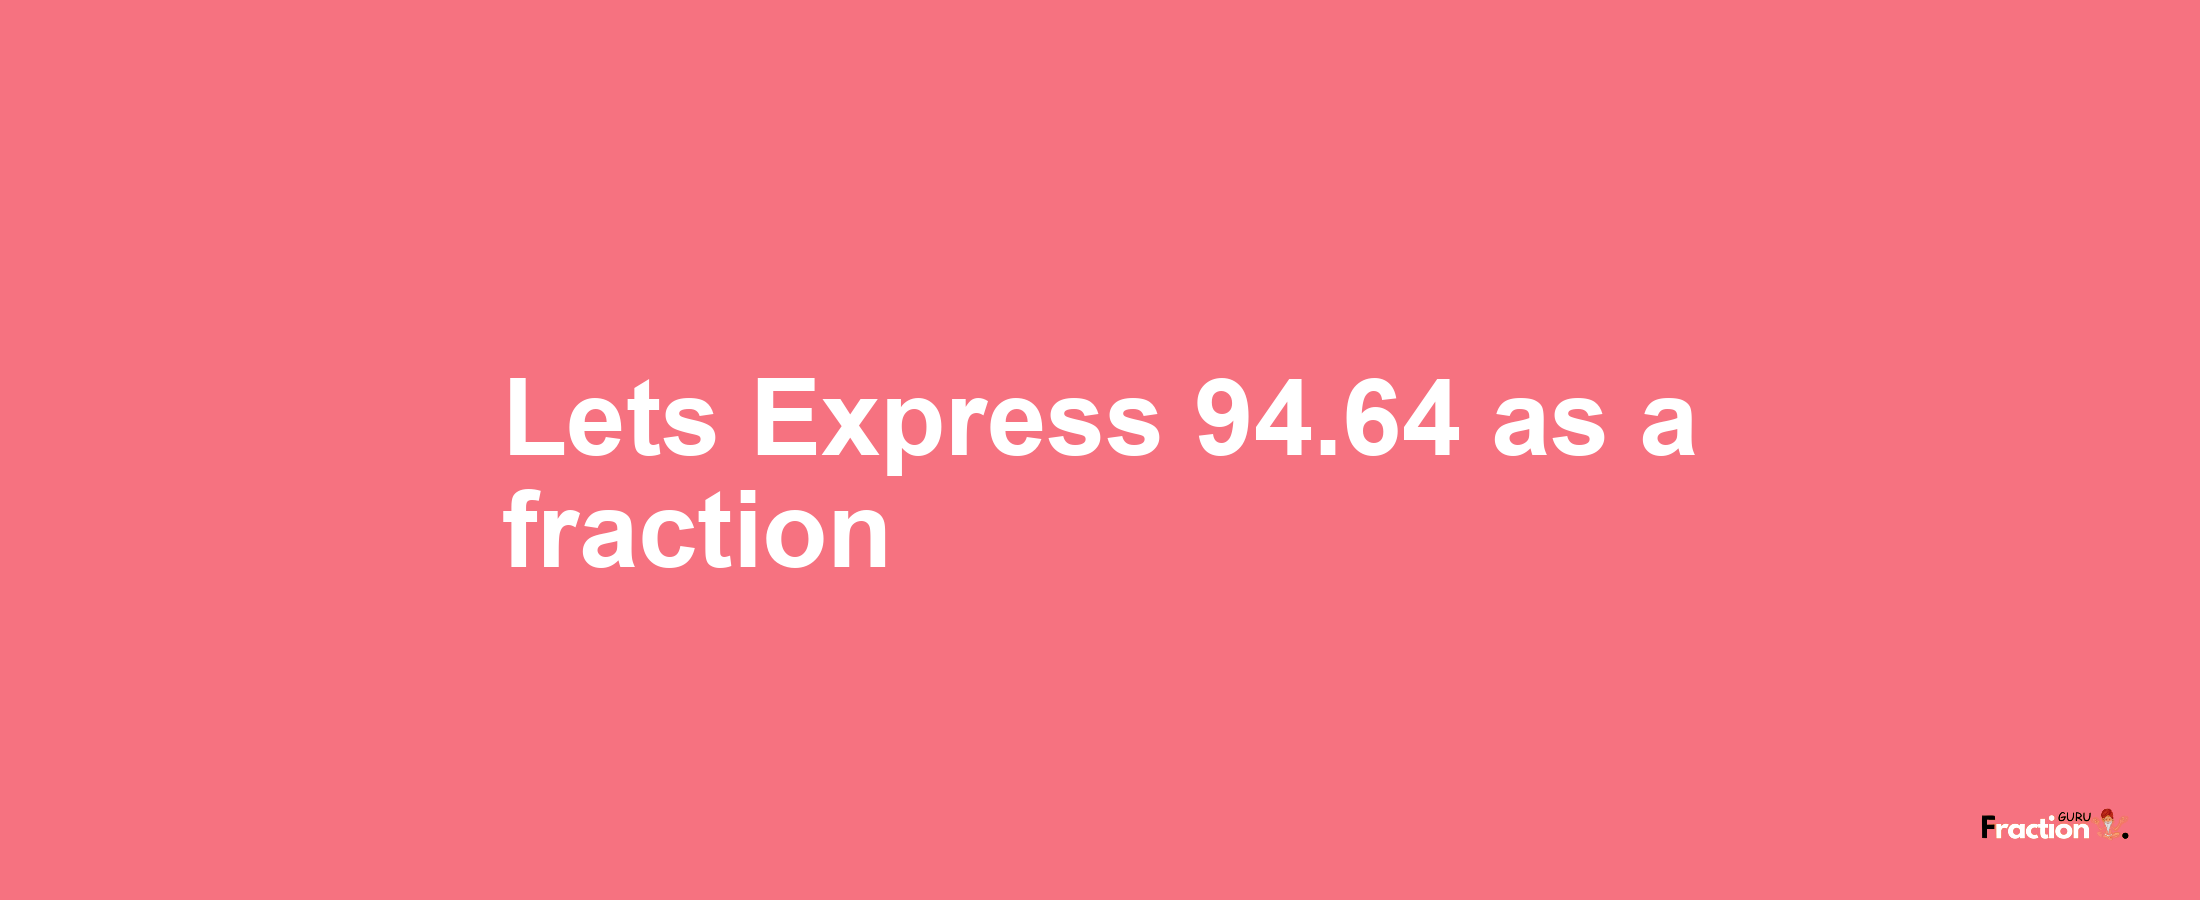 Lets Express 94.64 as afraction